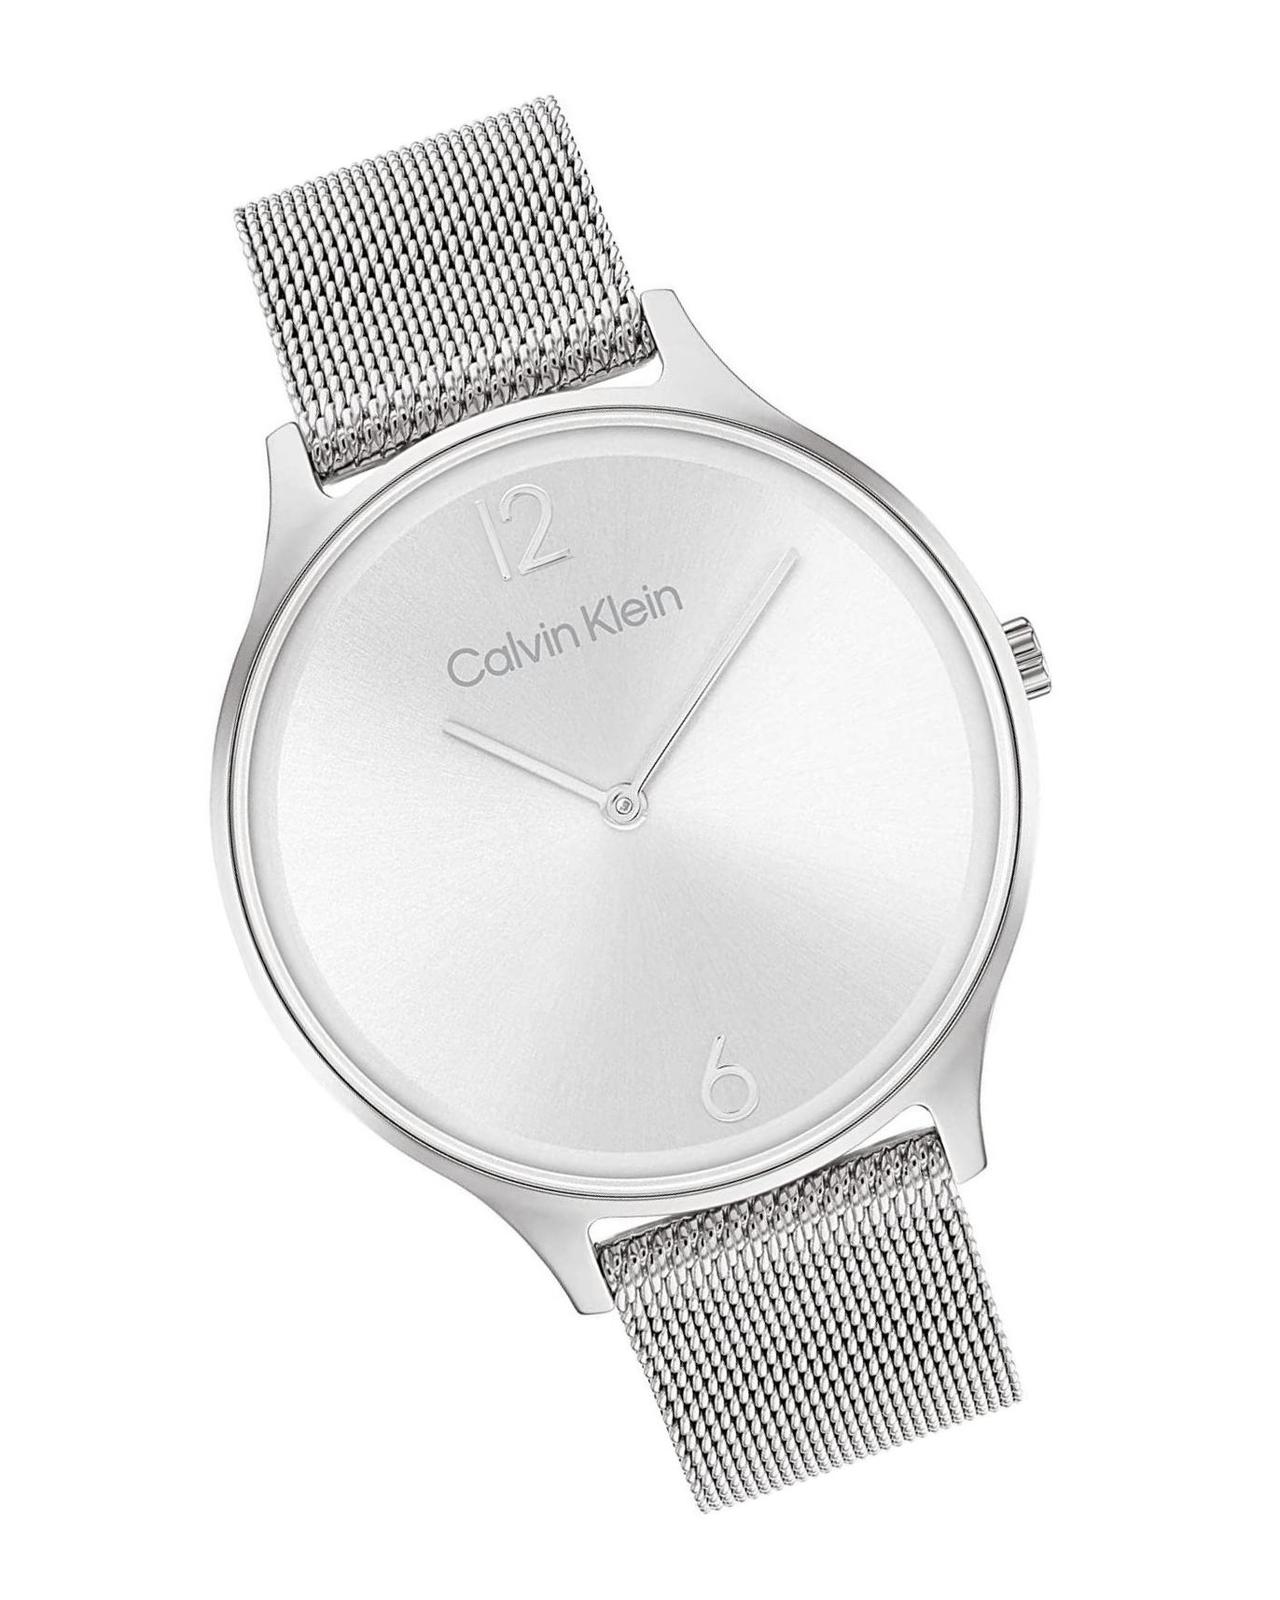 Primary image for Women's Quartz Stainless Steel and Mesh